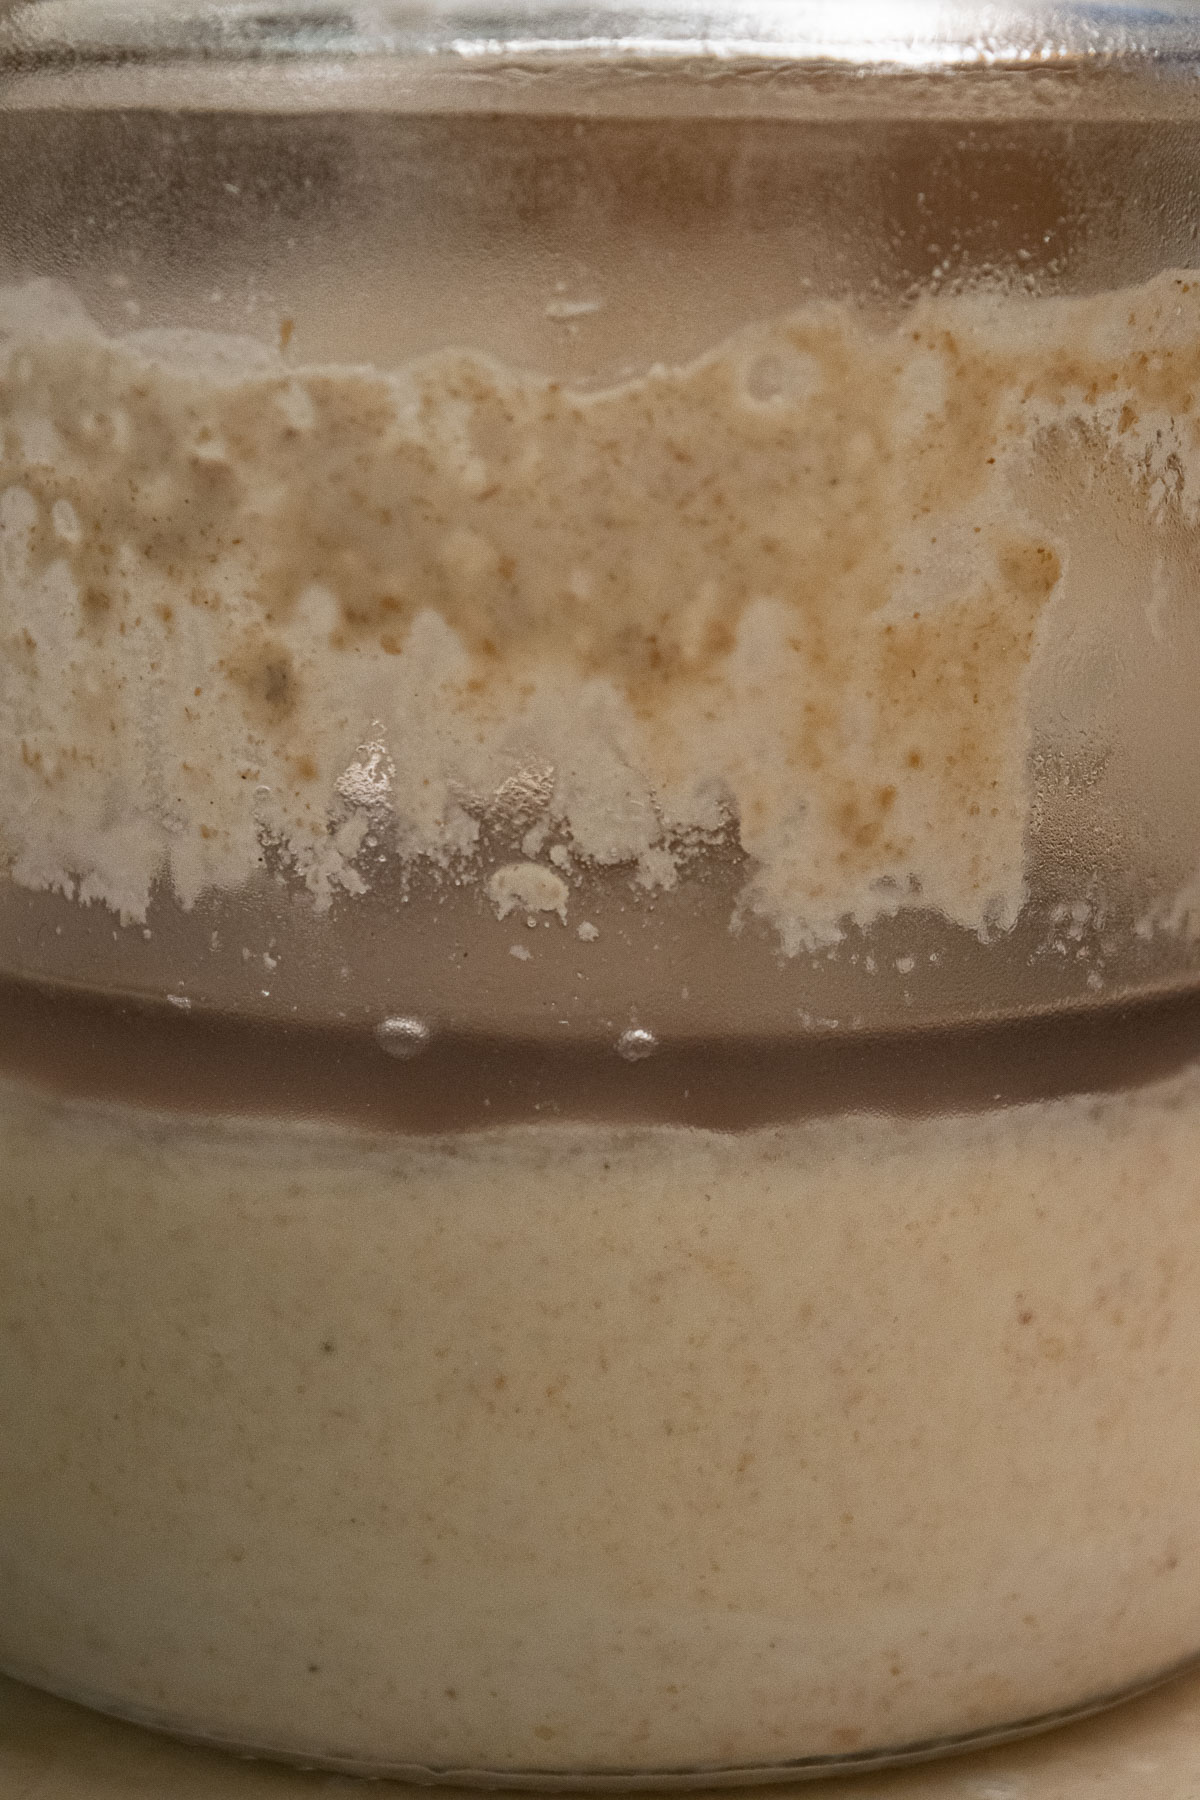 A glass jar containing a sourdough starter with a layer of gray liquid on top